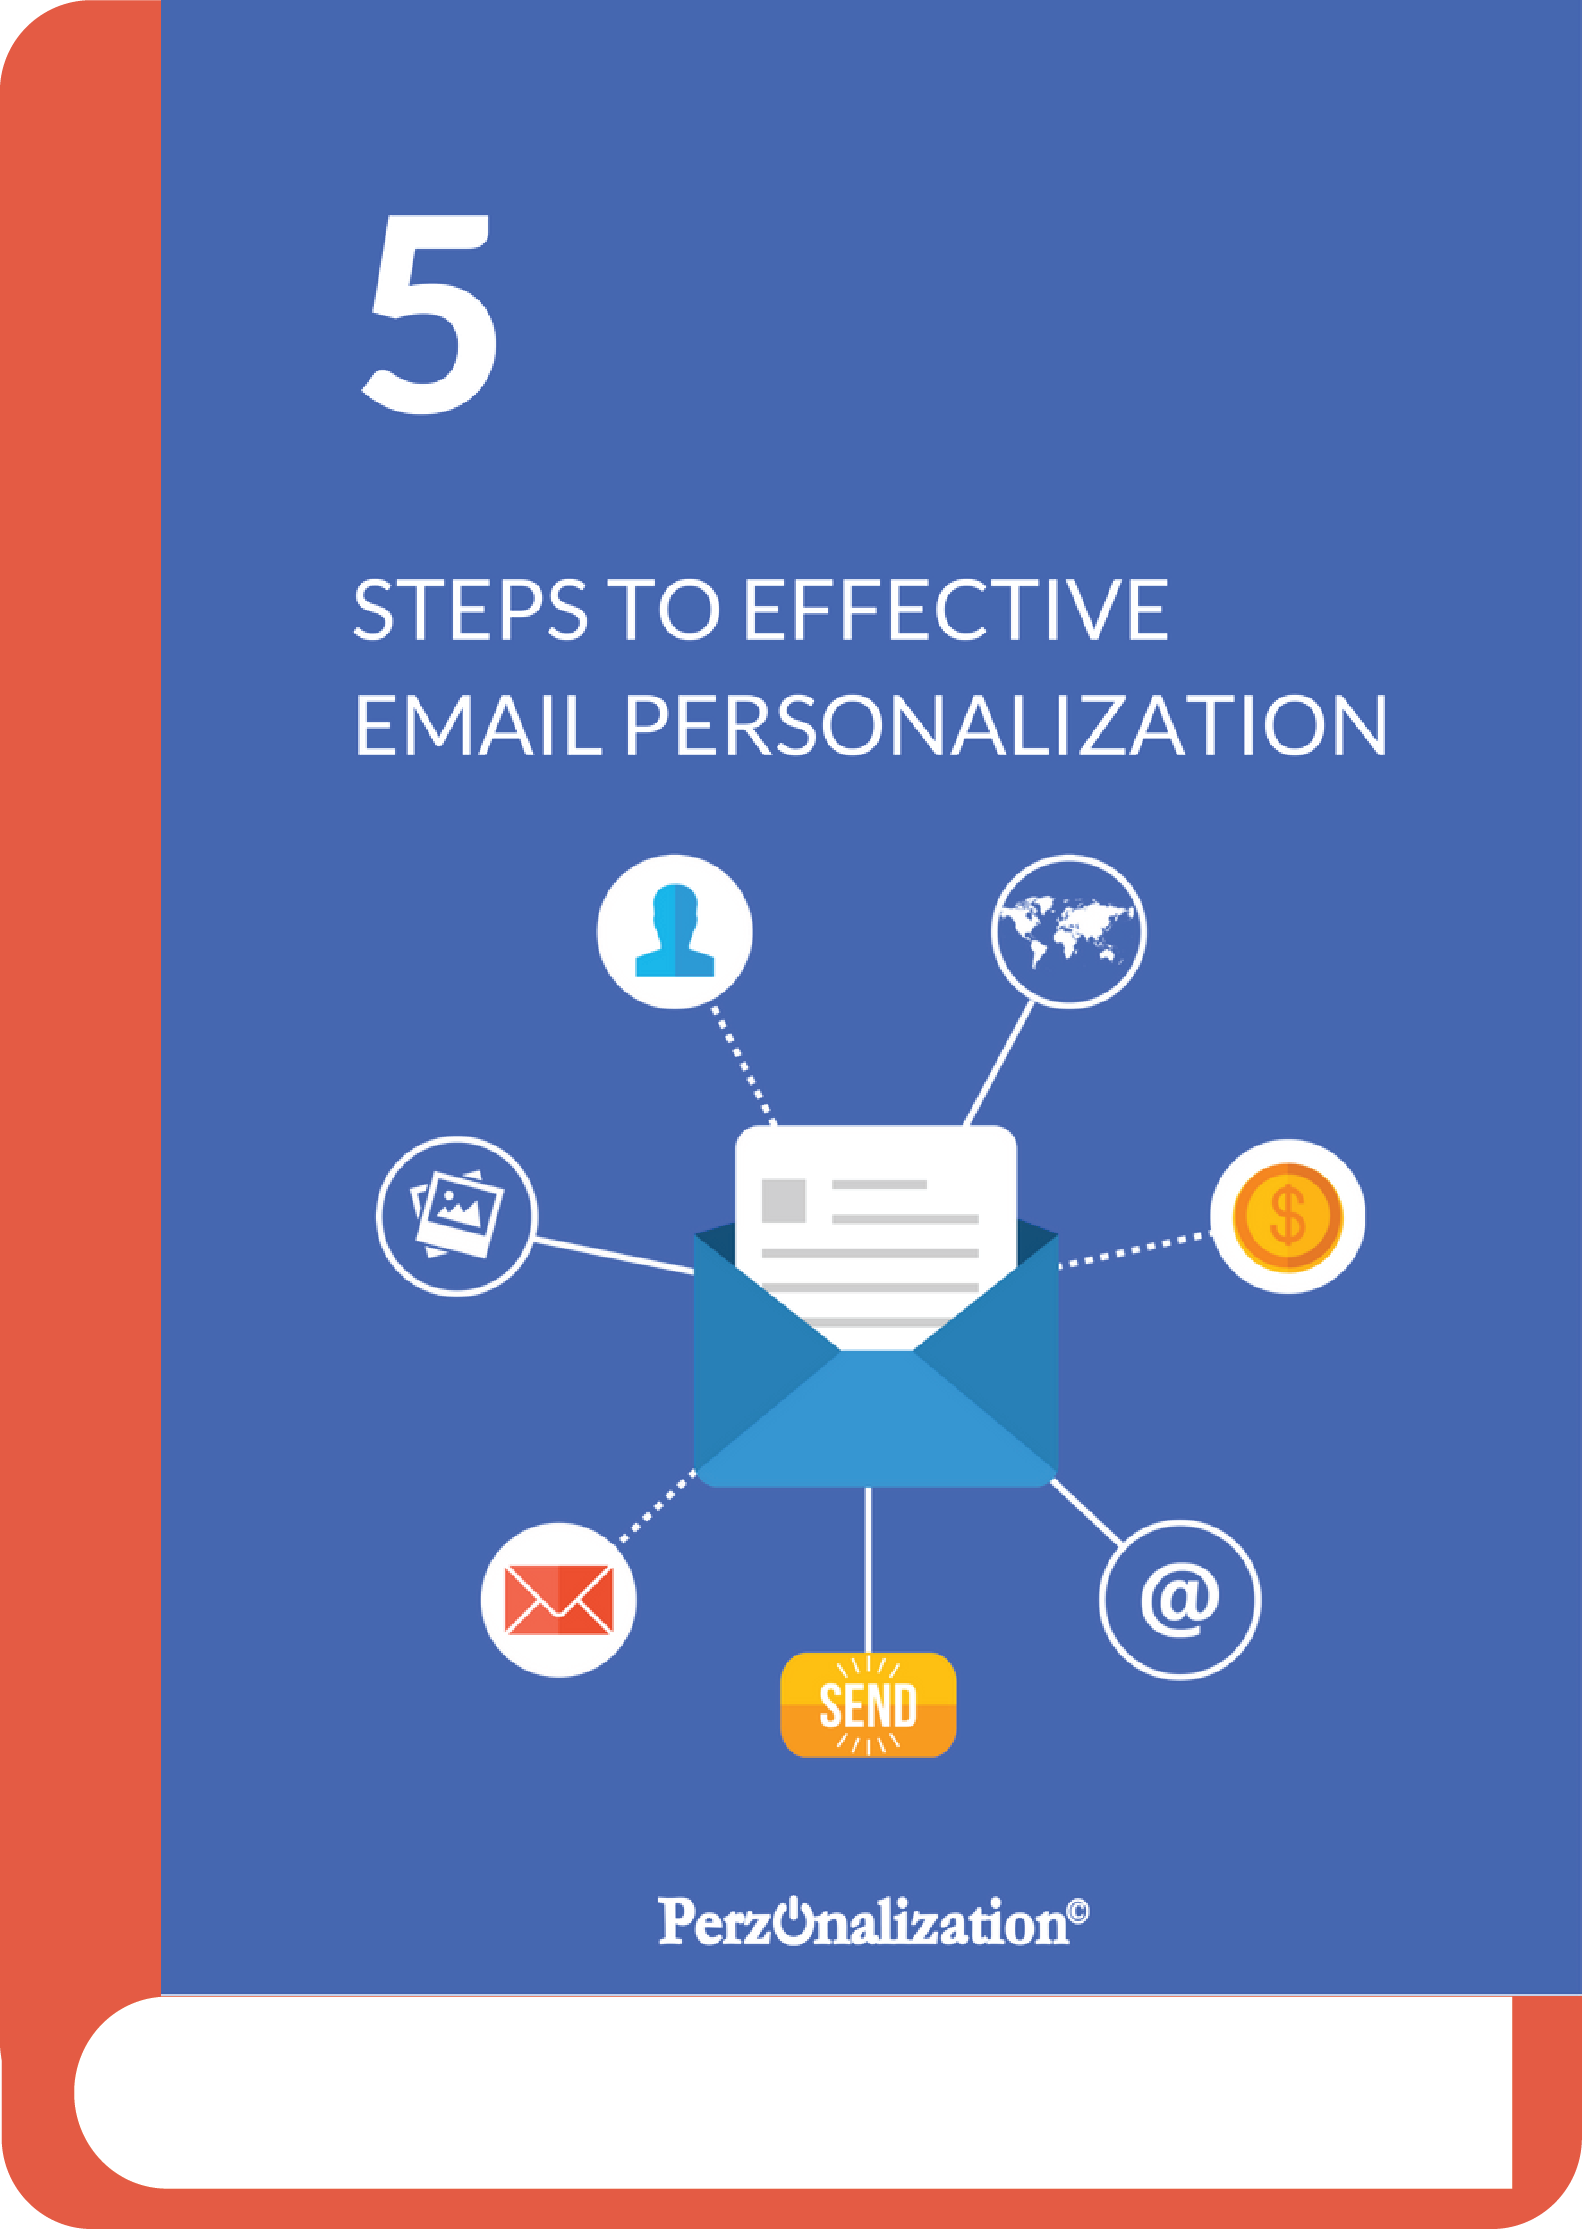 Even in today’s era of eCommerce, one of the vital eCommerce marketing tools is email marketing. In this eBook, you’ll have a chance to discover the different aspects of email marketing and how to use personalization and other predictive models to send more effective e-mails.